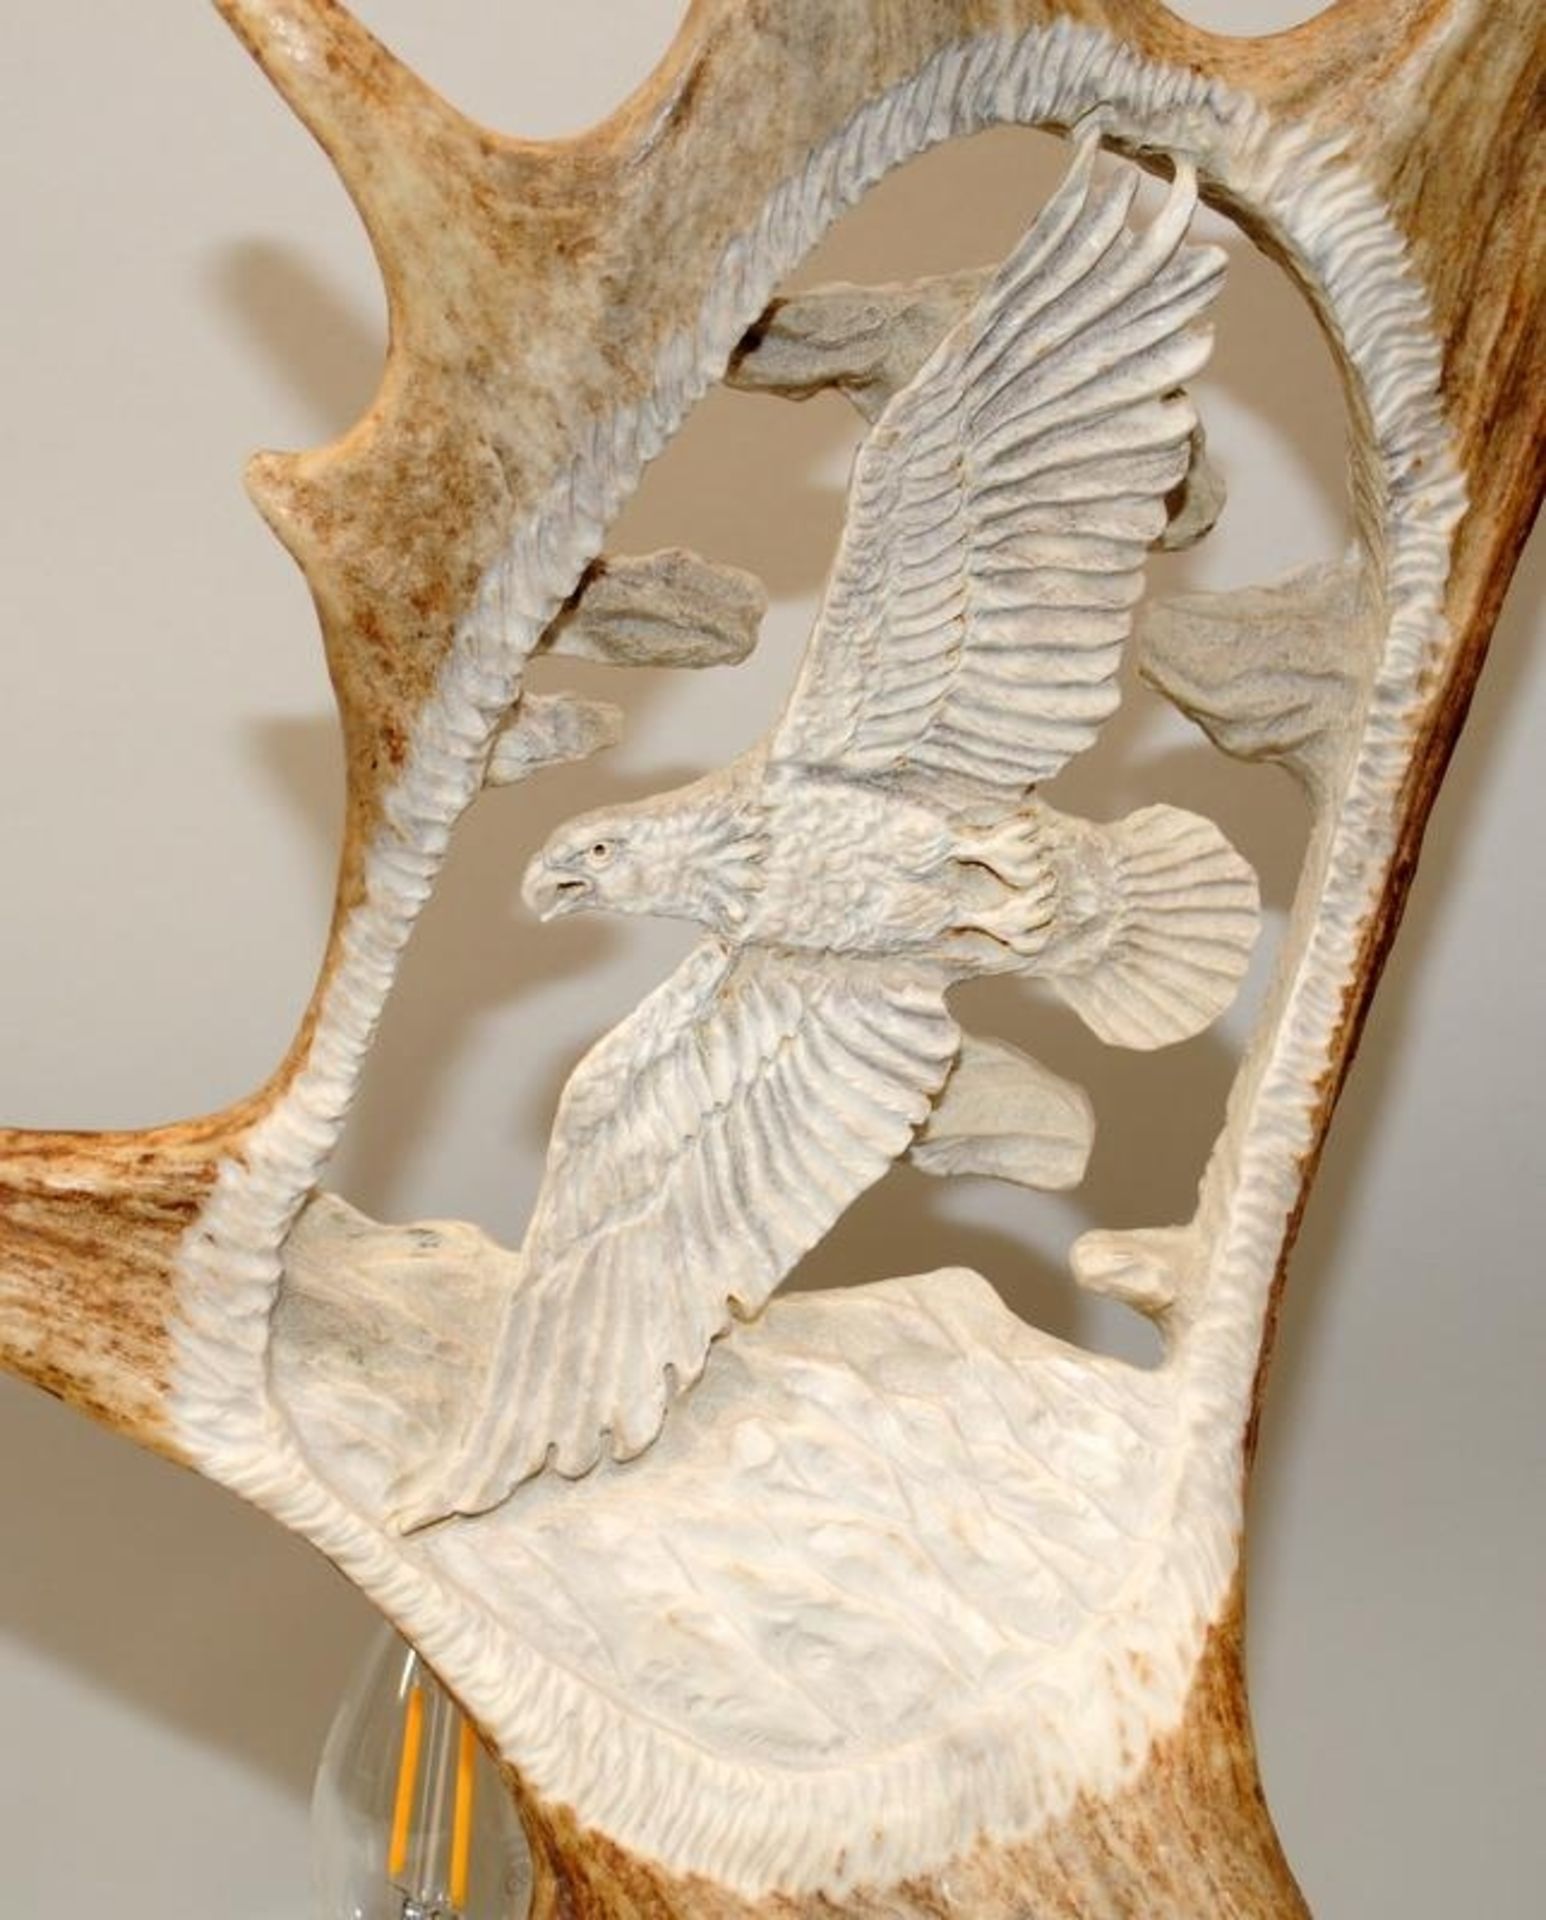 Large antler horn with incised carving depicting an eagle. Mounted on a wooden base and - Image 2 of 3